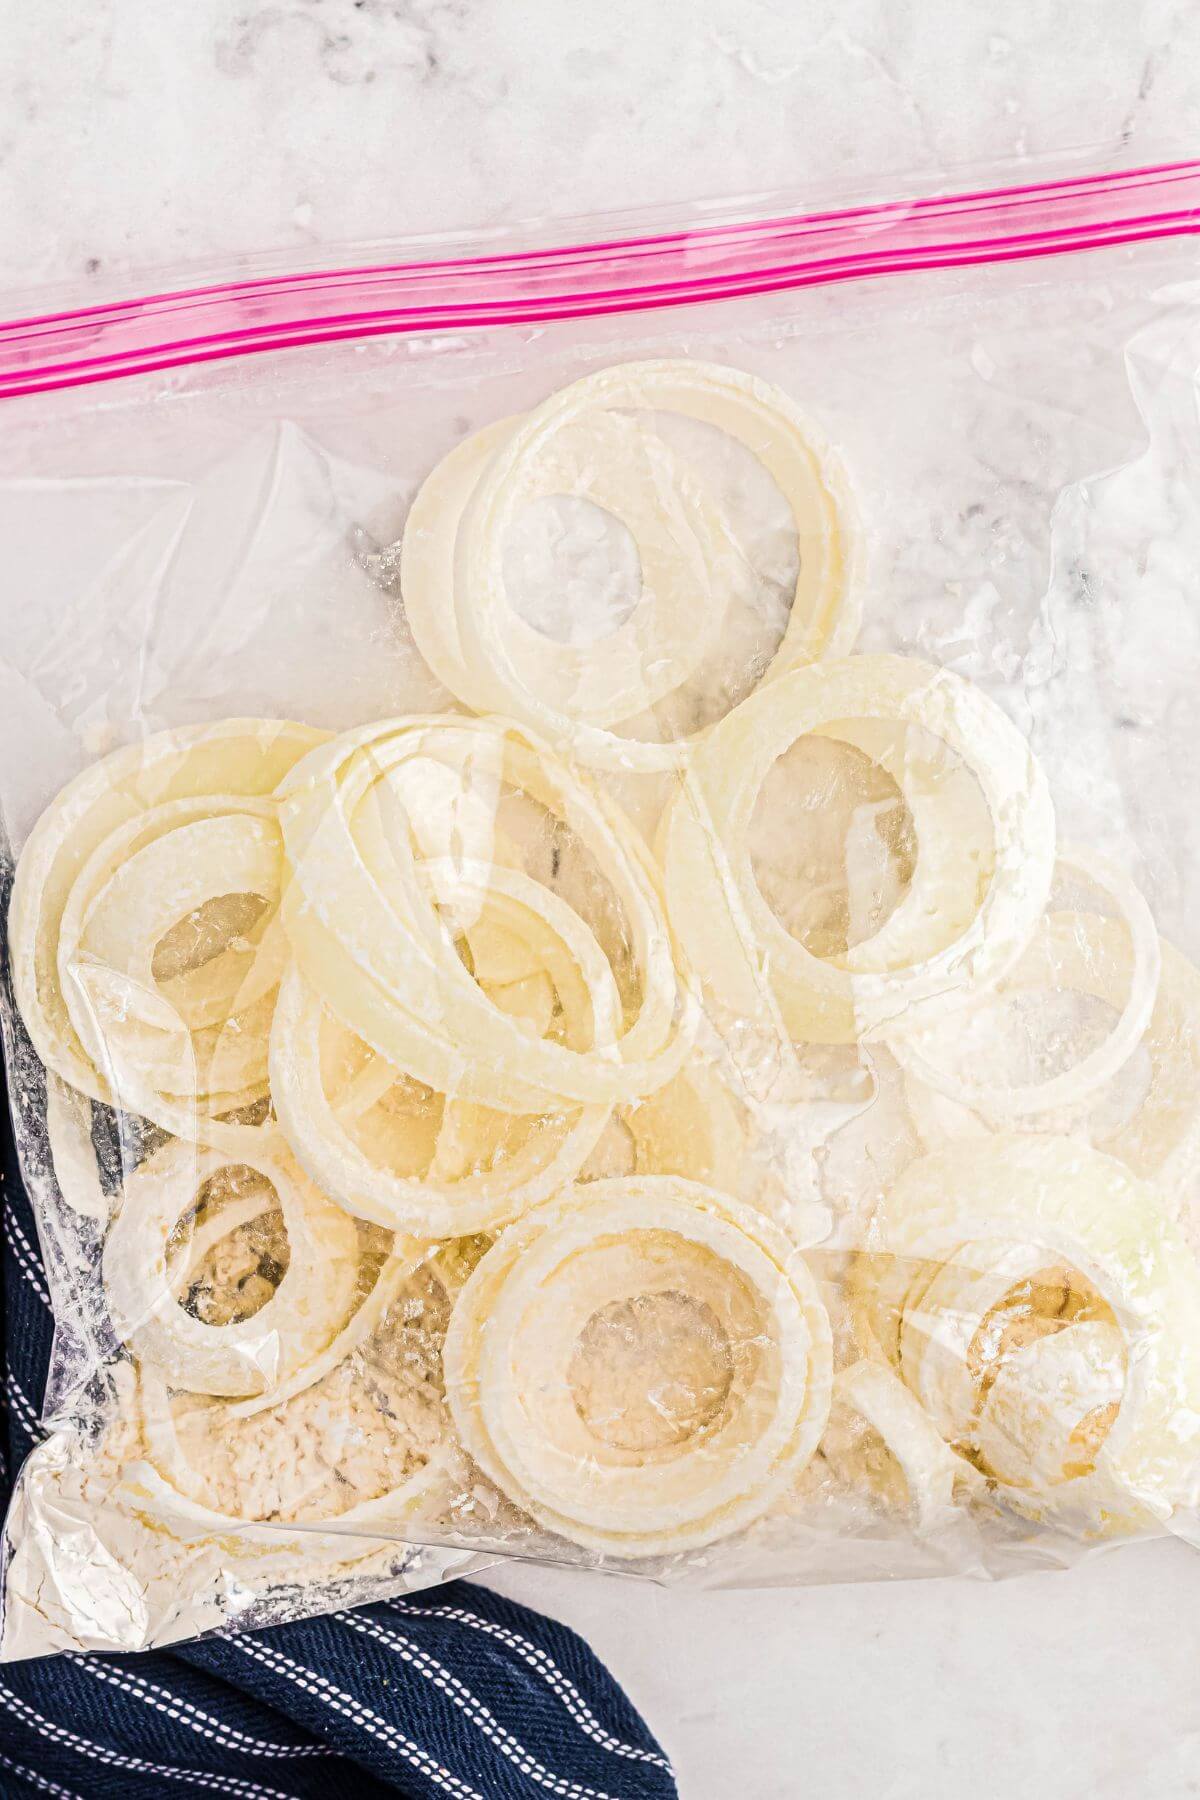 Onions sliced in a ziploc bag being mixed with flour.